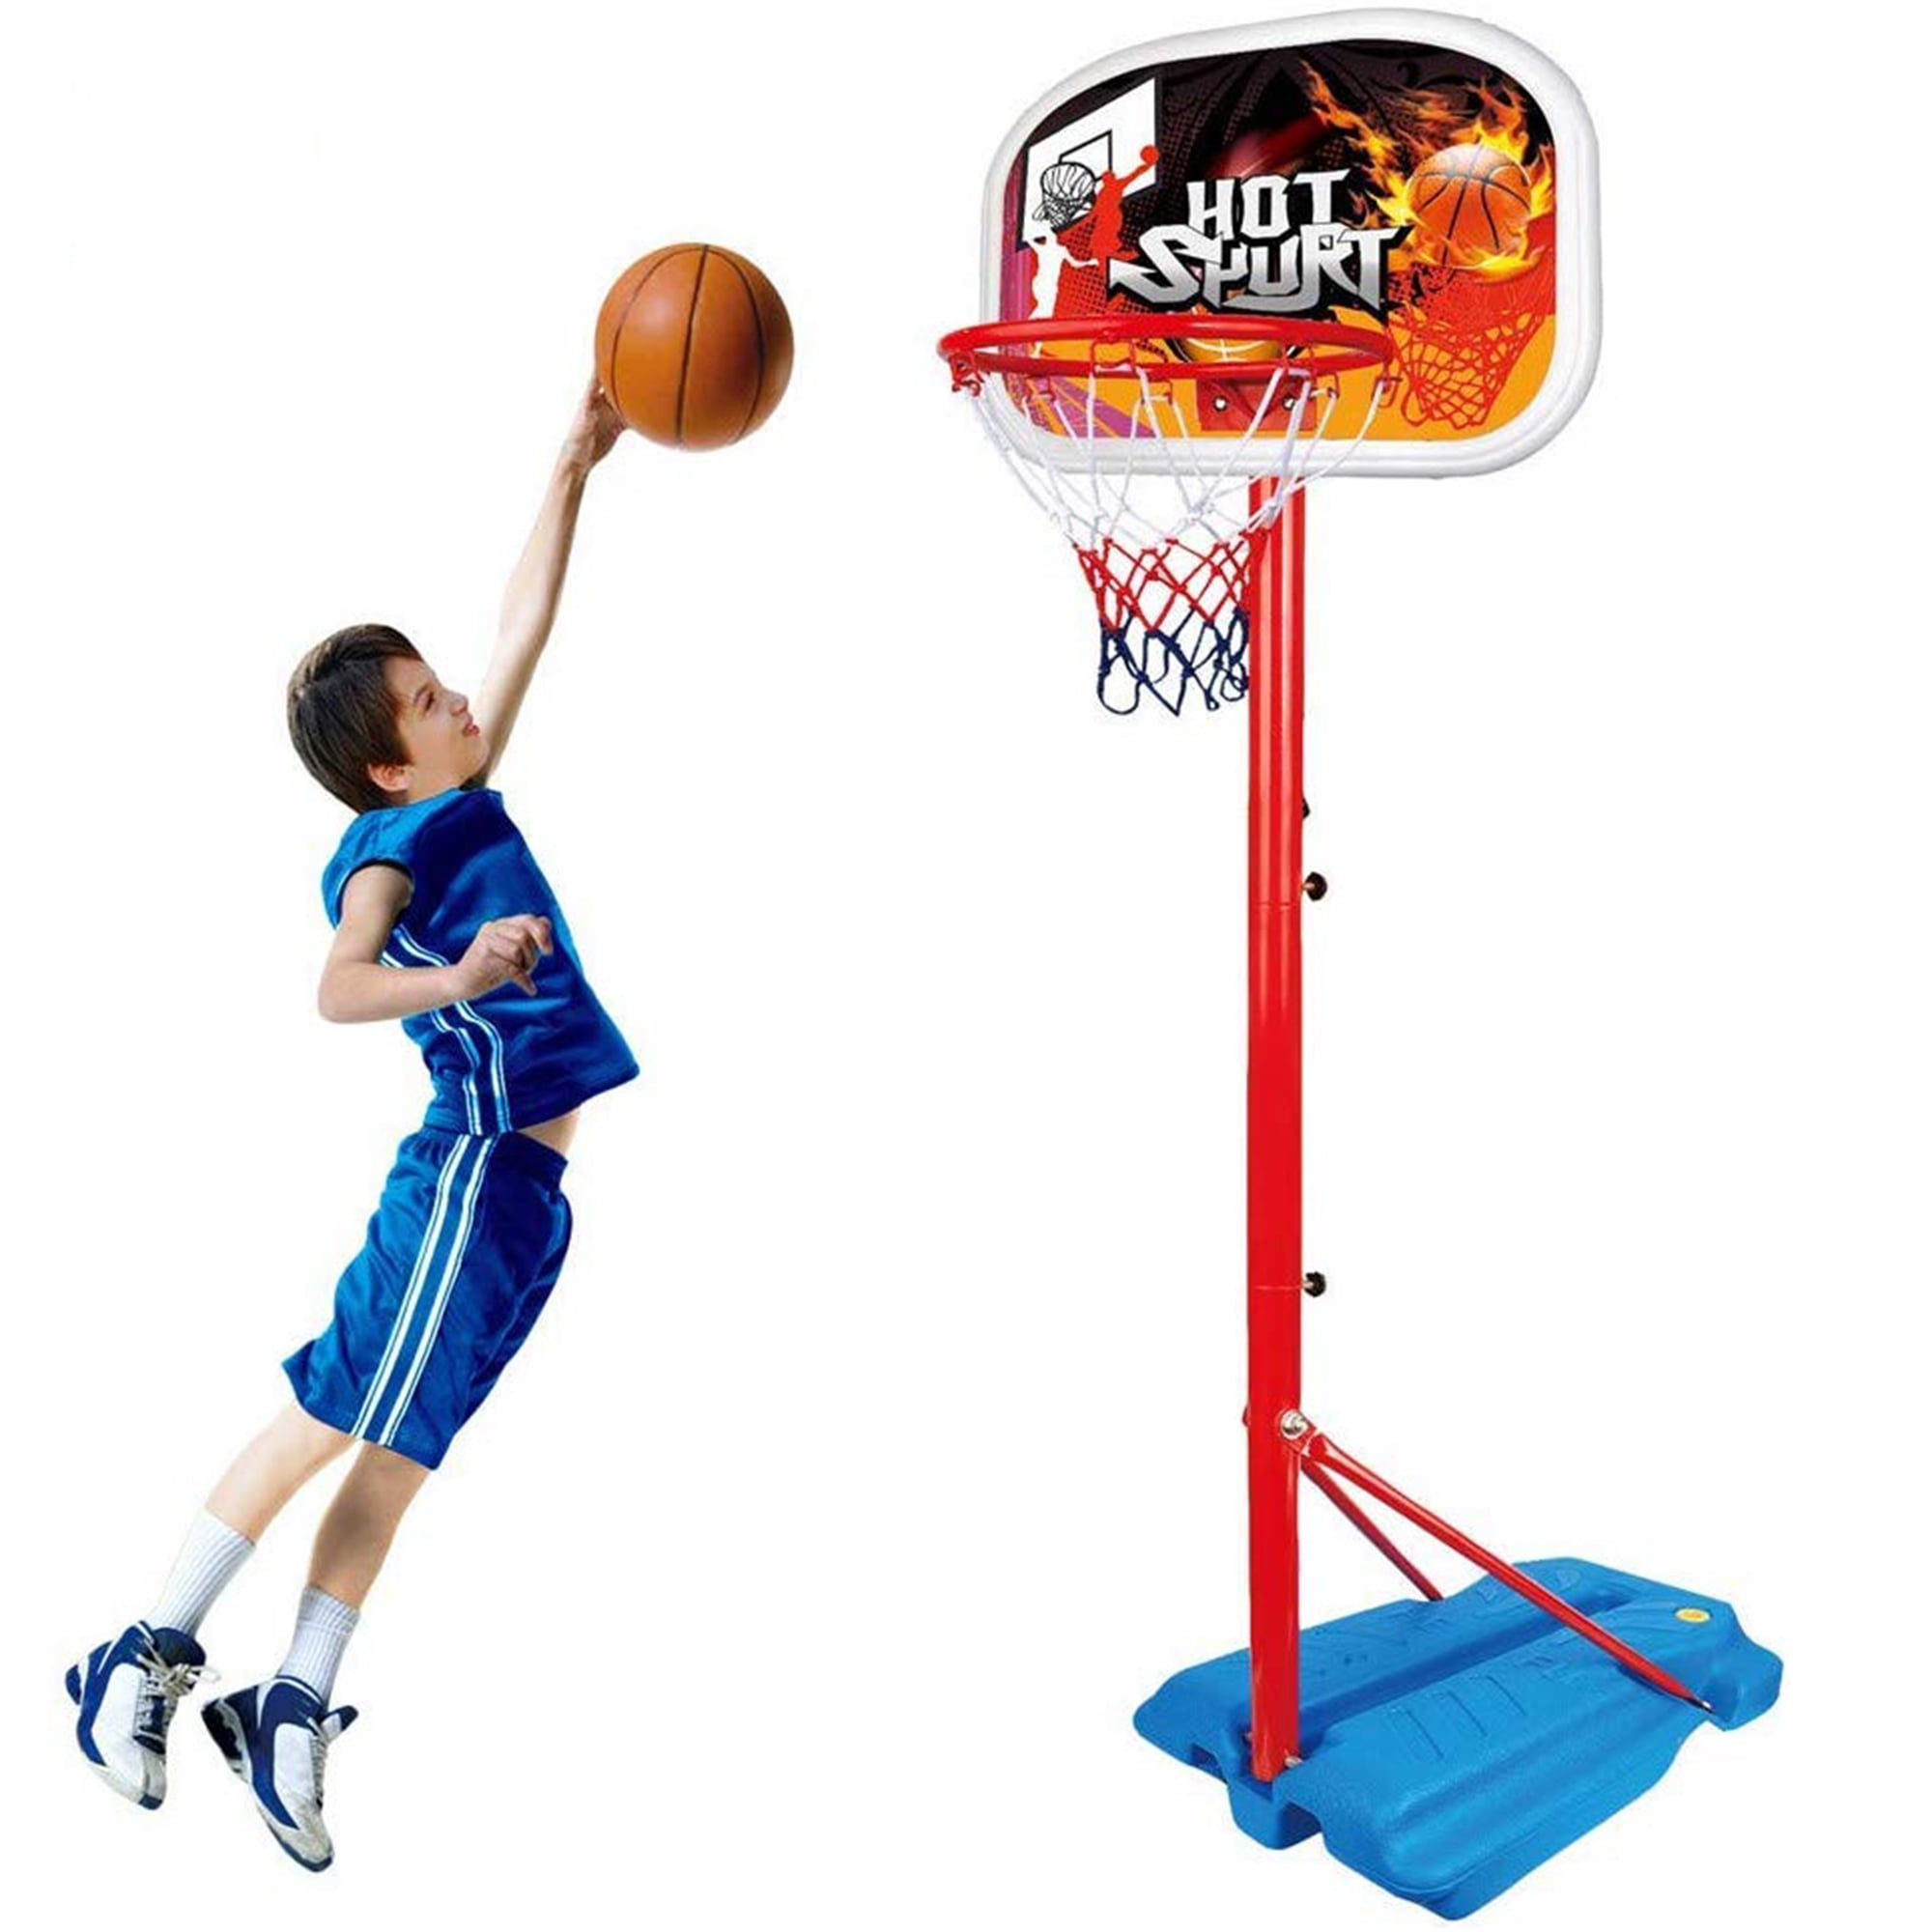 WZM Ball Football Stand Plastic Indoor Outdoor Kids Play Toys Portable with Ball Net Hoop Backboard Adjustable Stand Set with Ball Basketball Set